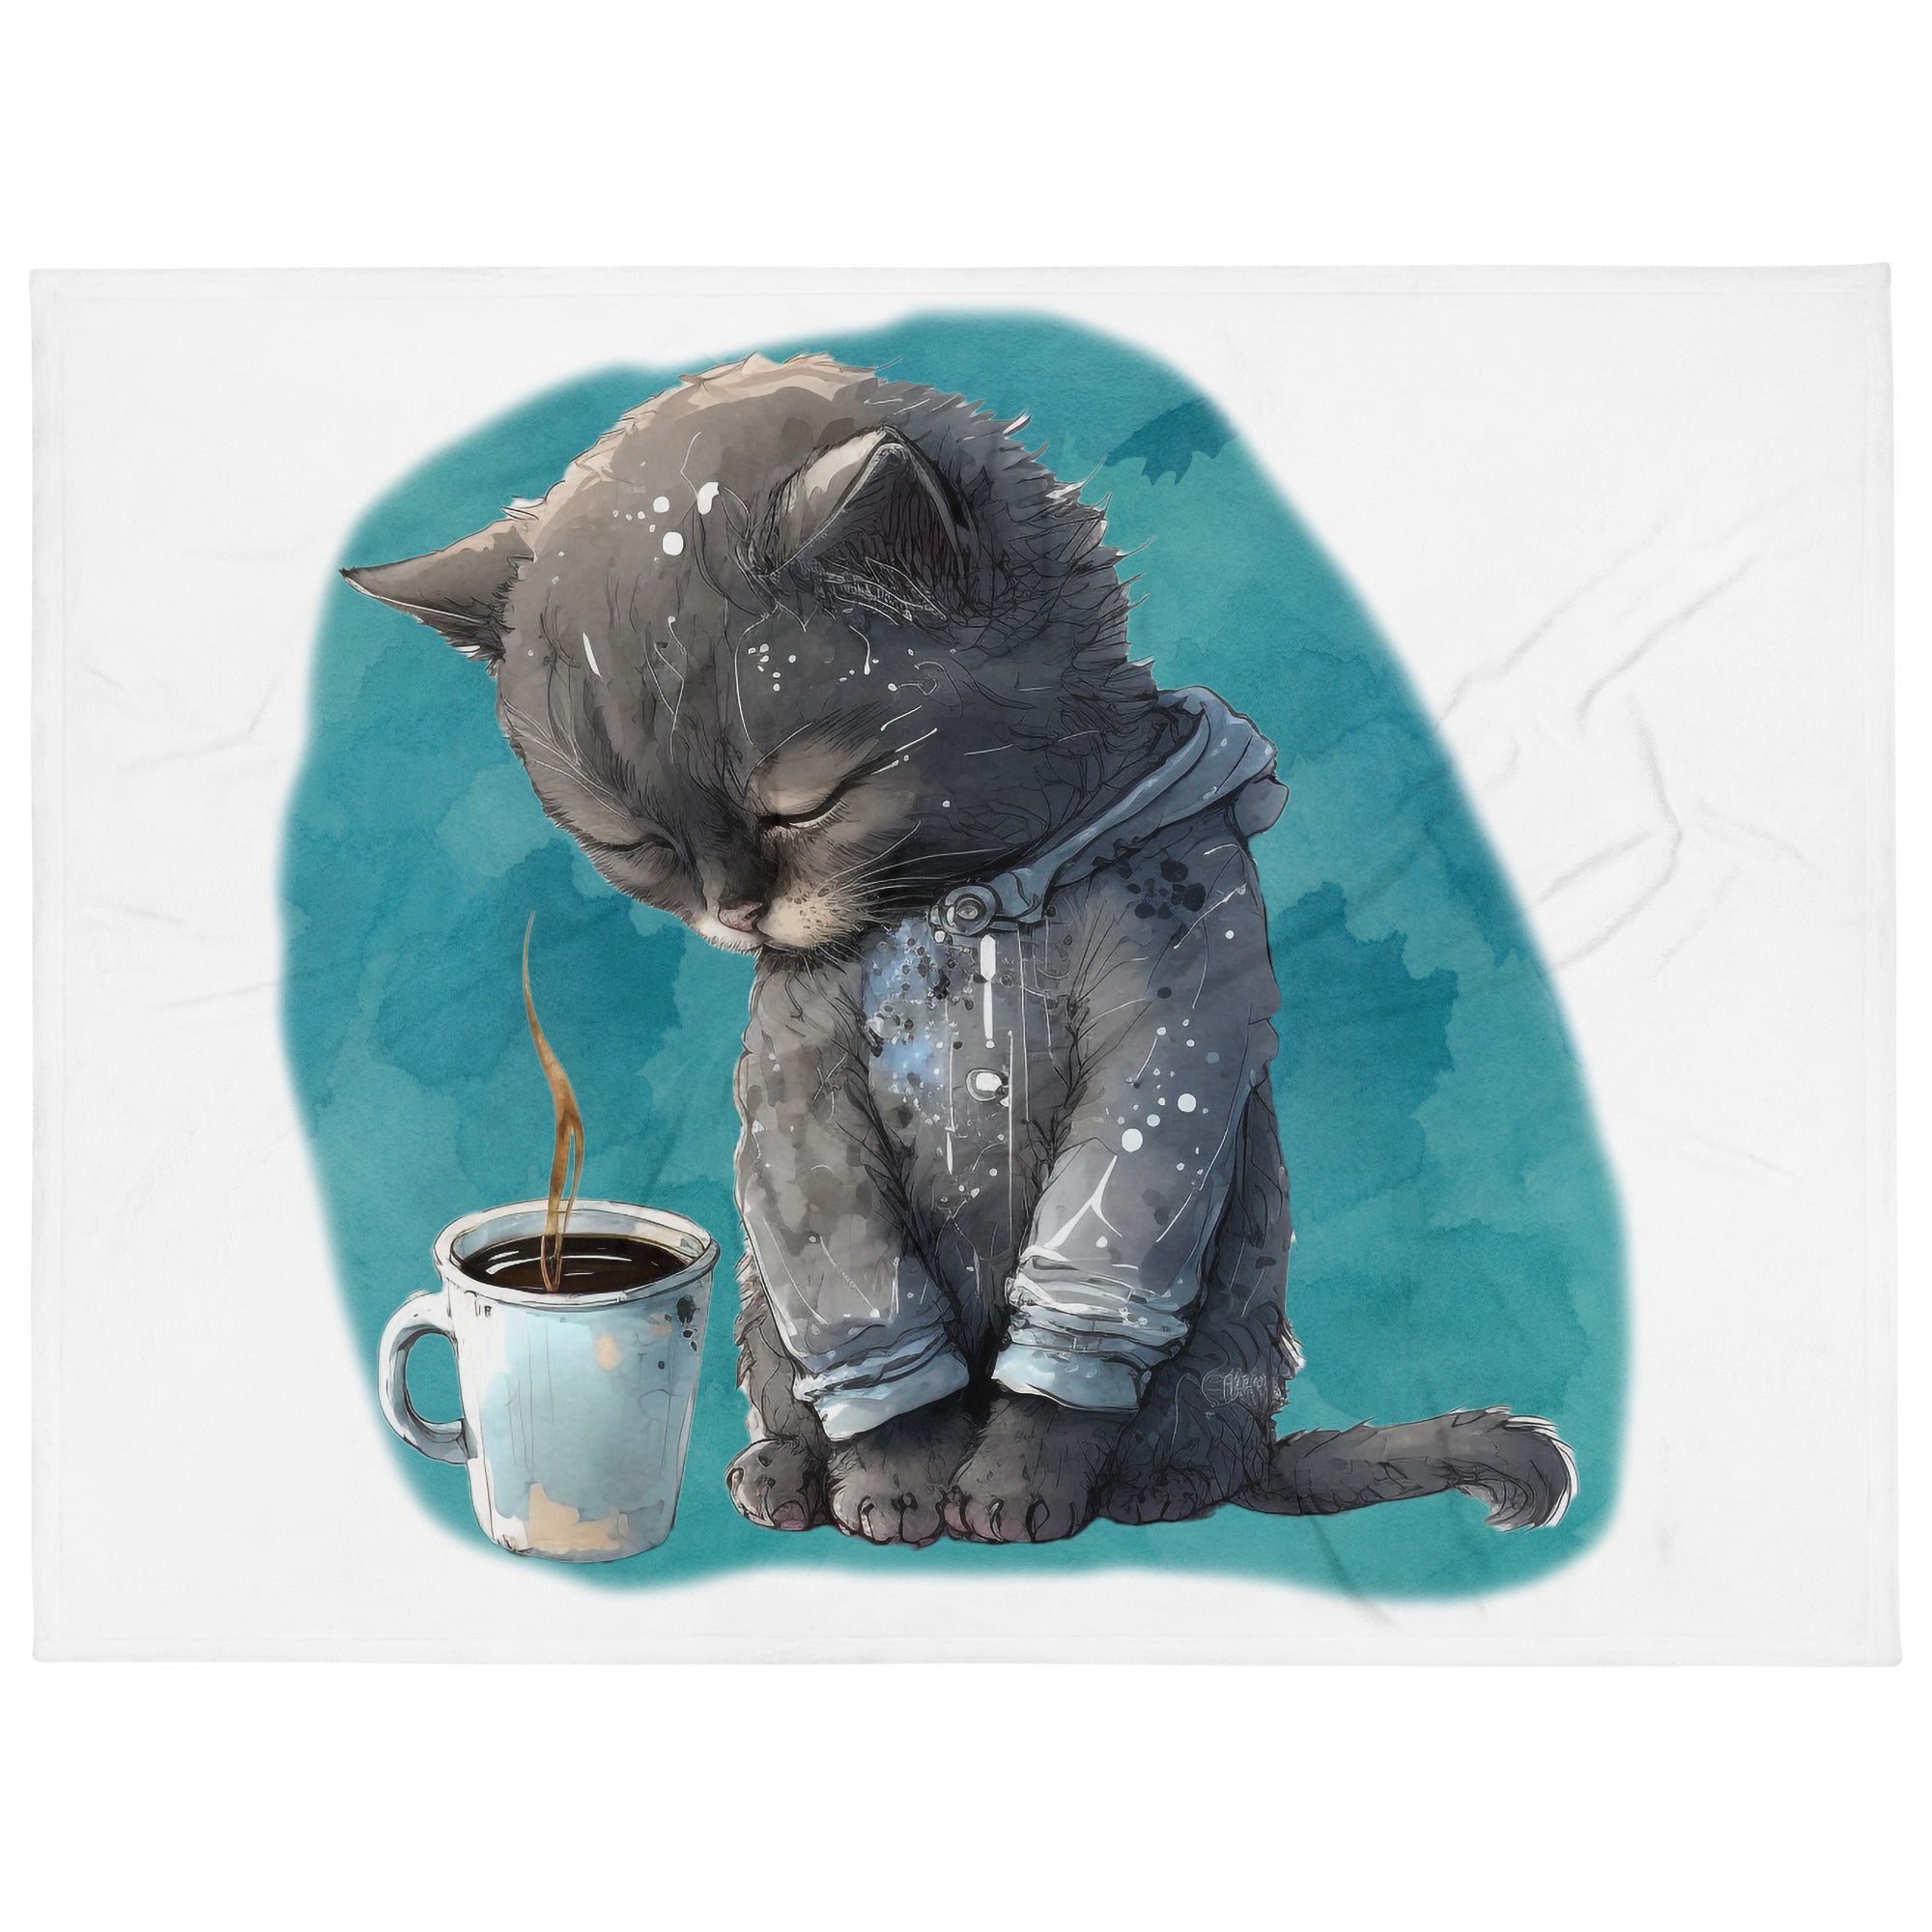 Sleepy Cat 100% Polyester Soft Silk Touch Fabric Throw Blanket - Cozy, Durable and Adorable